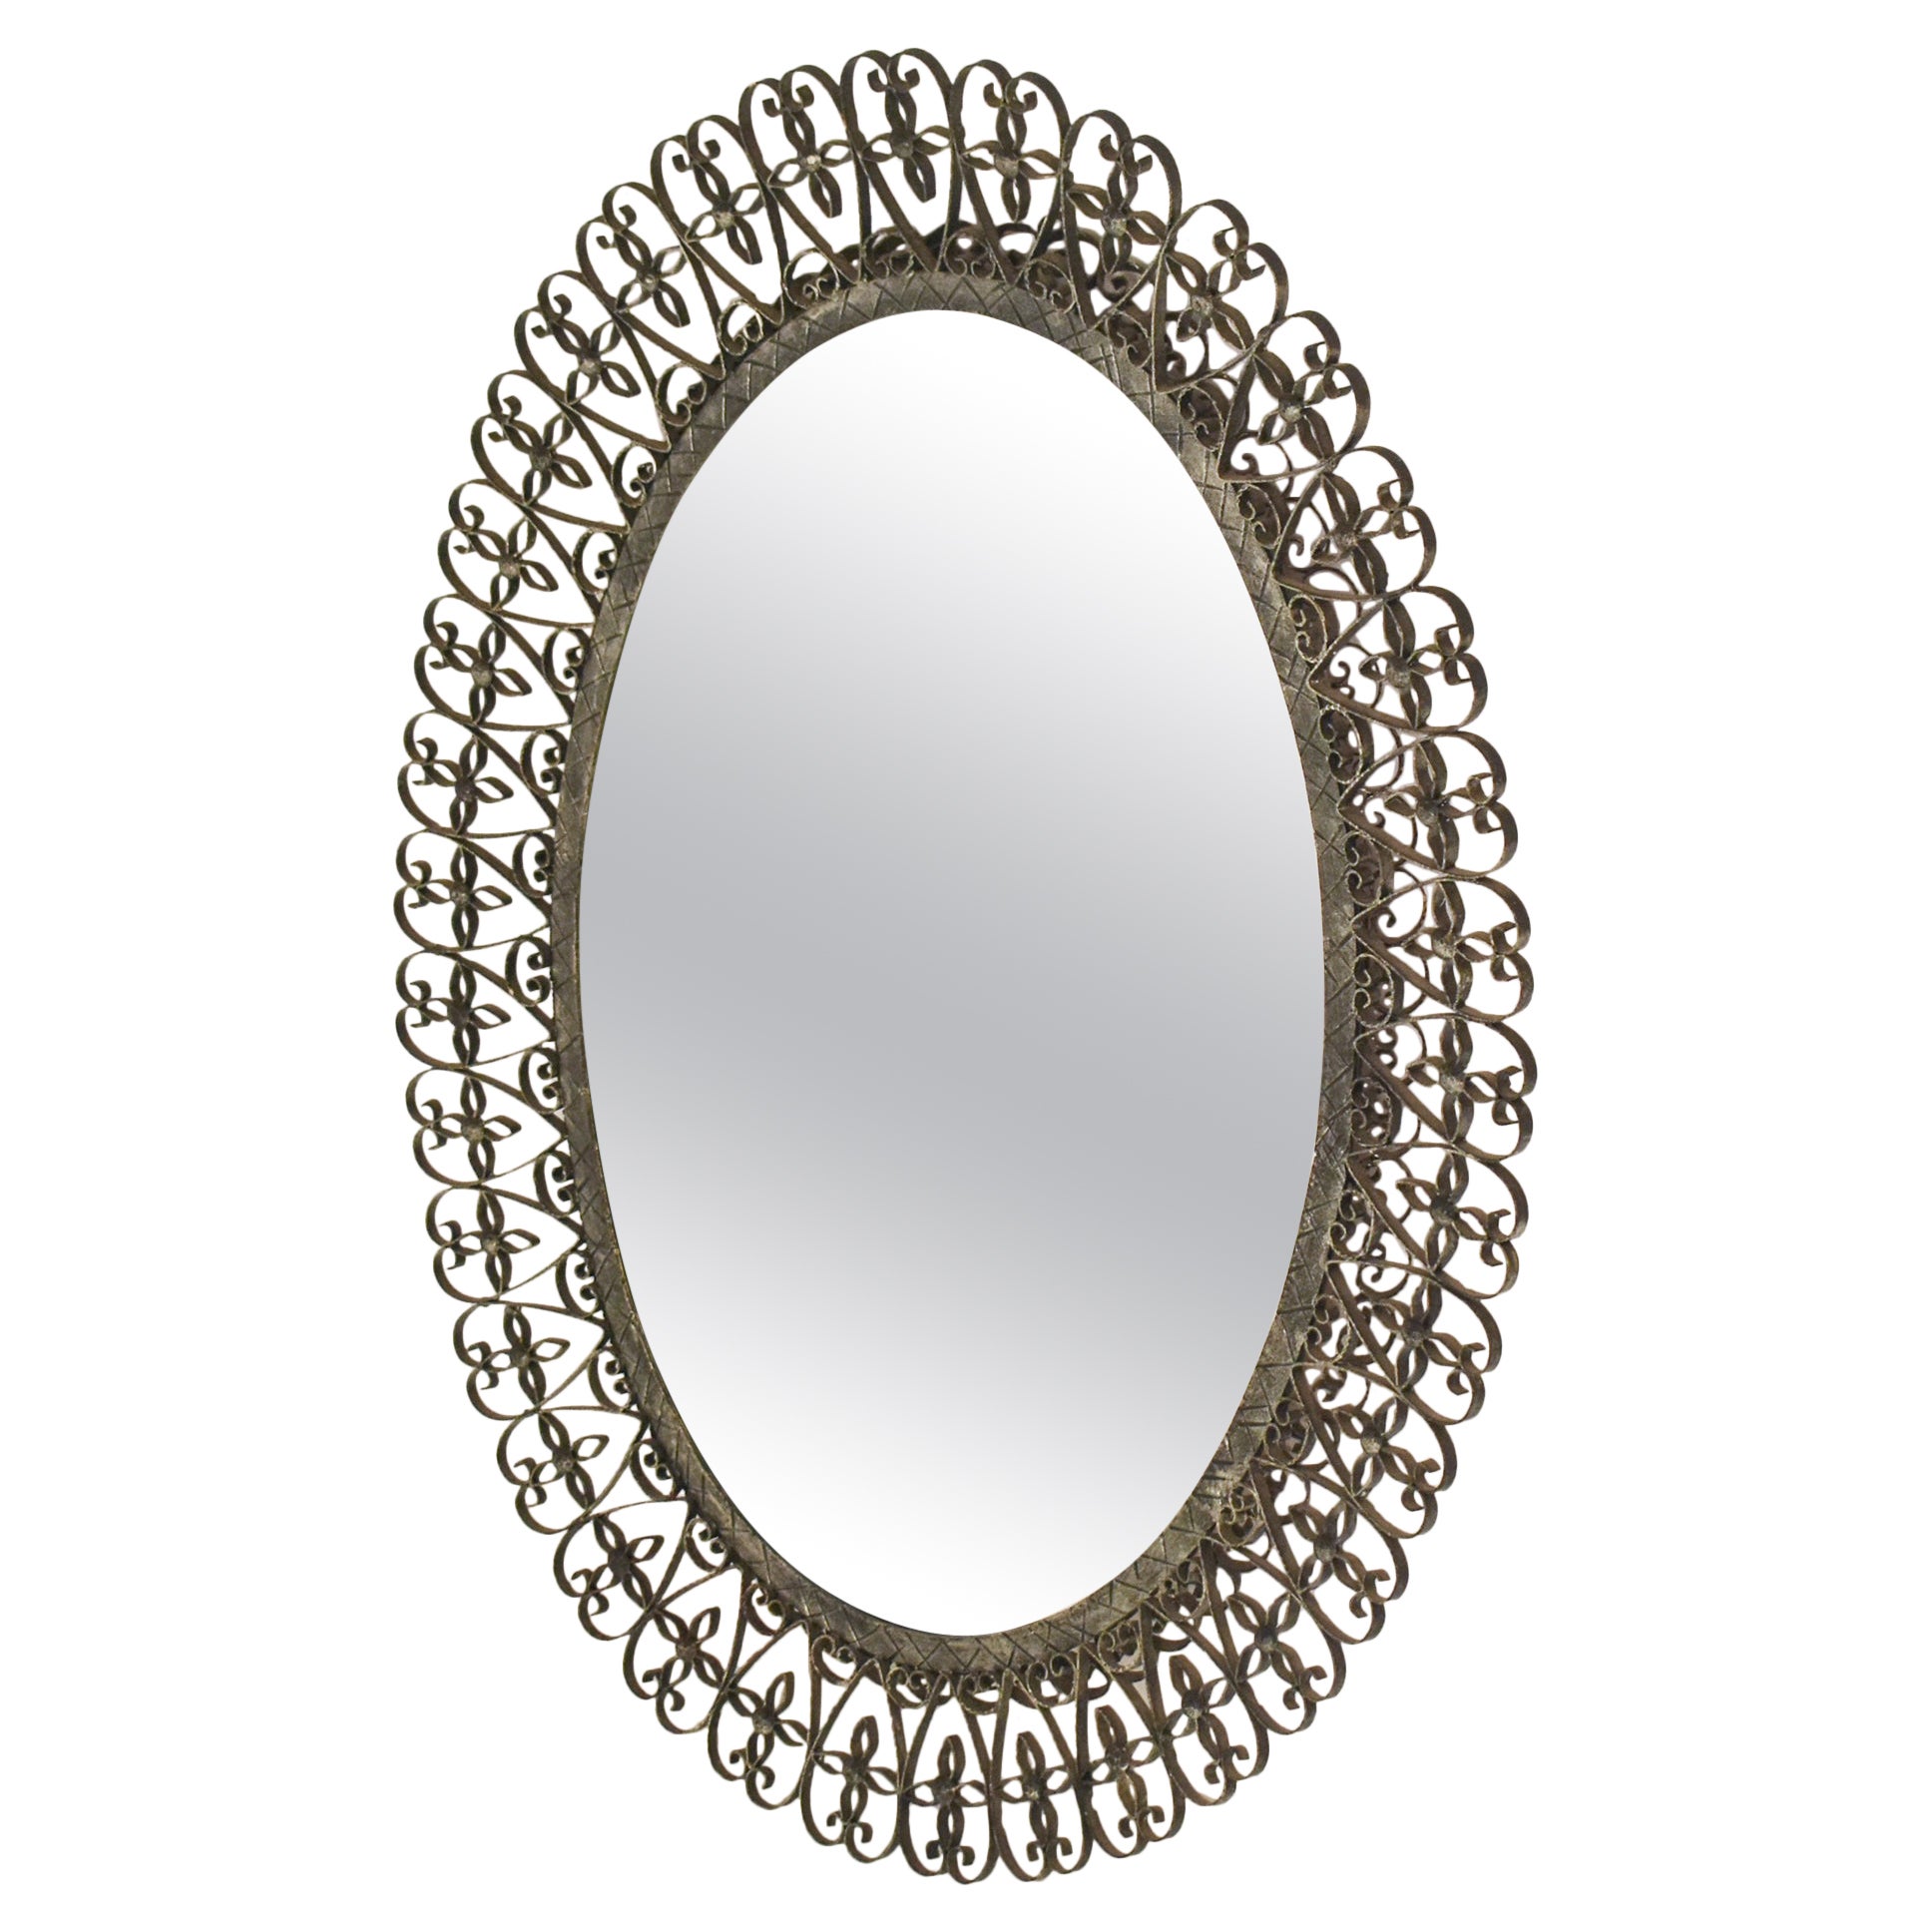 Oval mirror, wrought iron. Spain 1970's Patinated in aged silver color. For Sale